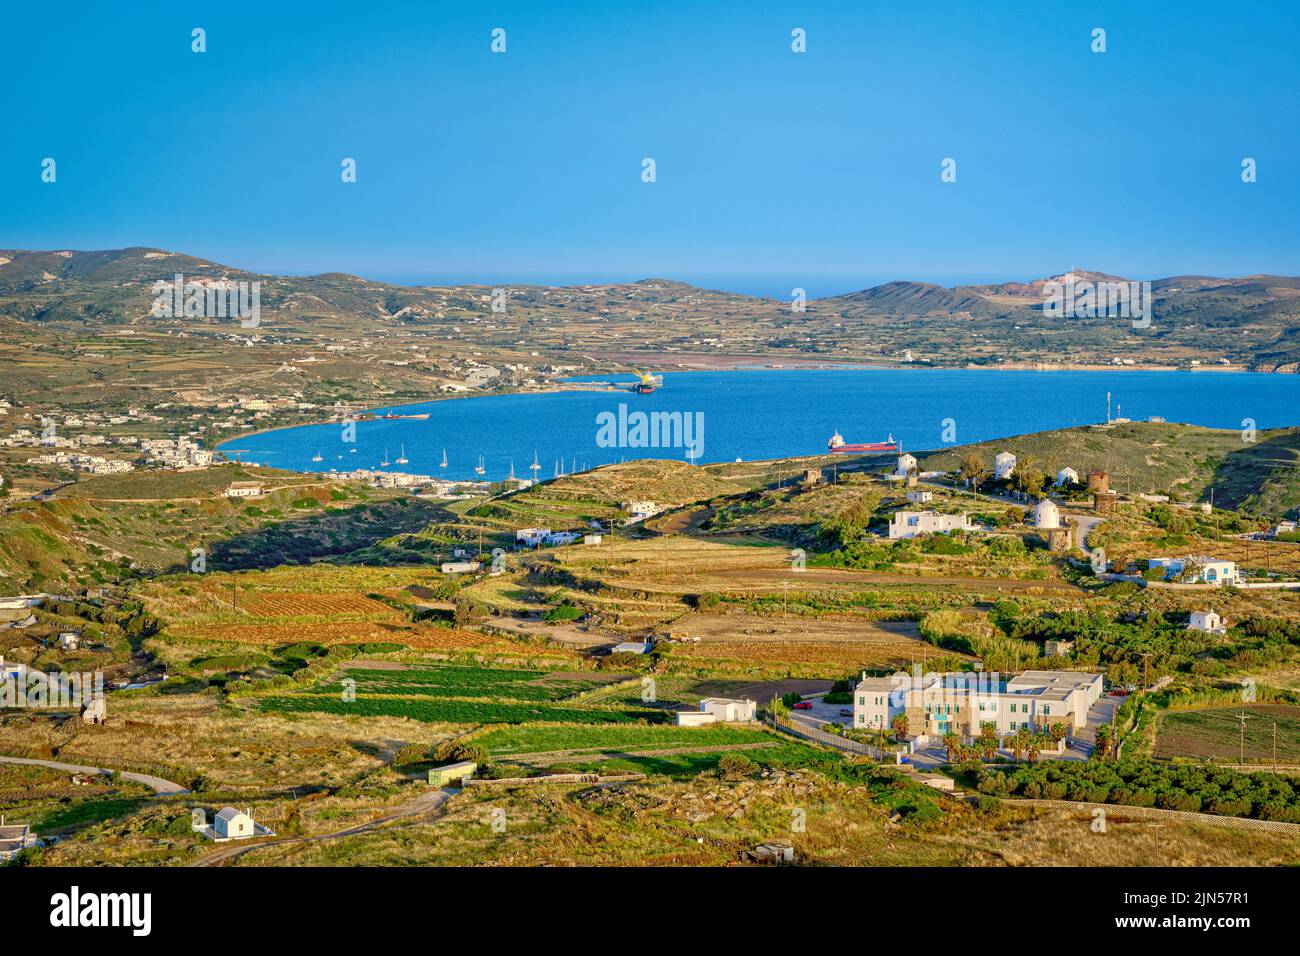 Beautiful view of Adamantas town, bay and villages of Milos island at sunset, Greece. Whitewashed houses, green hills, low sun, blue sea, clear sky, Stock Photo